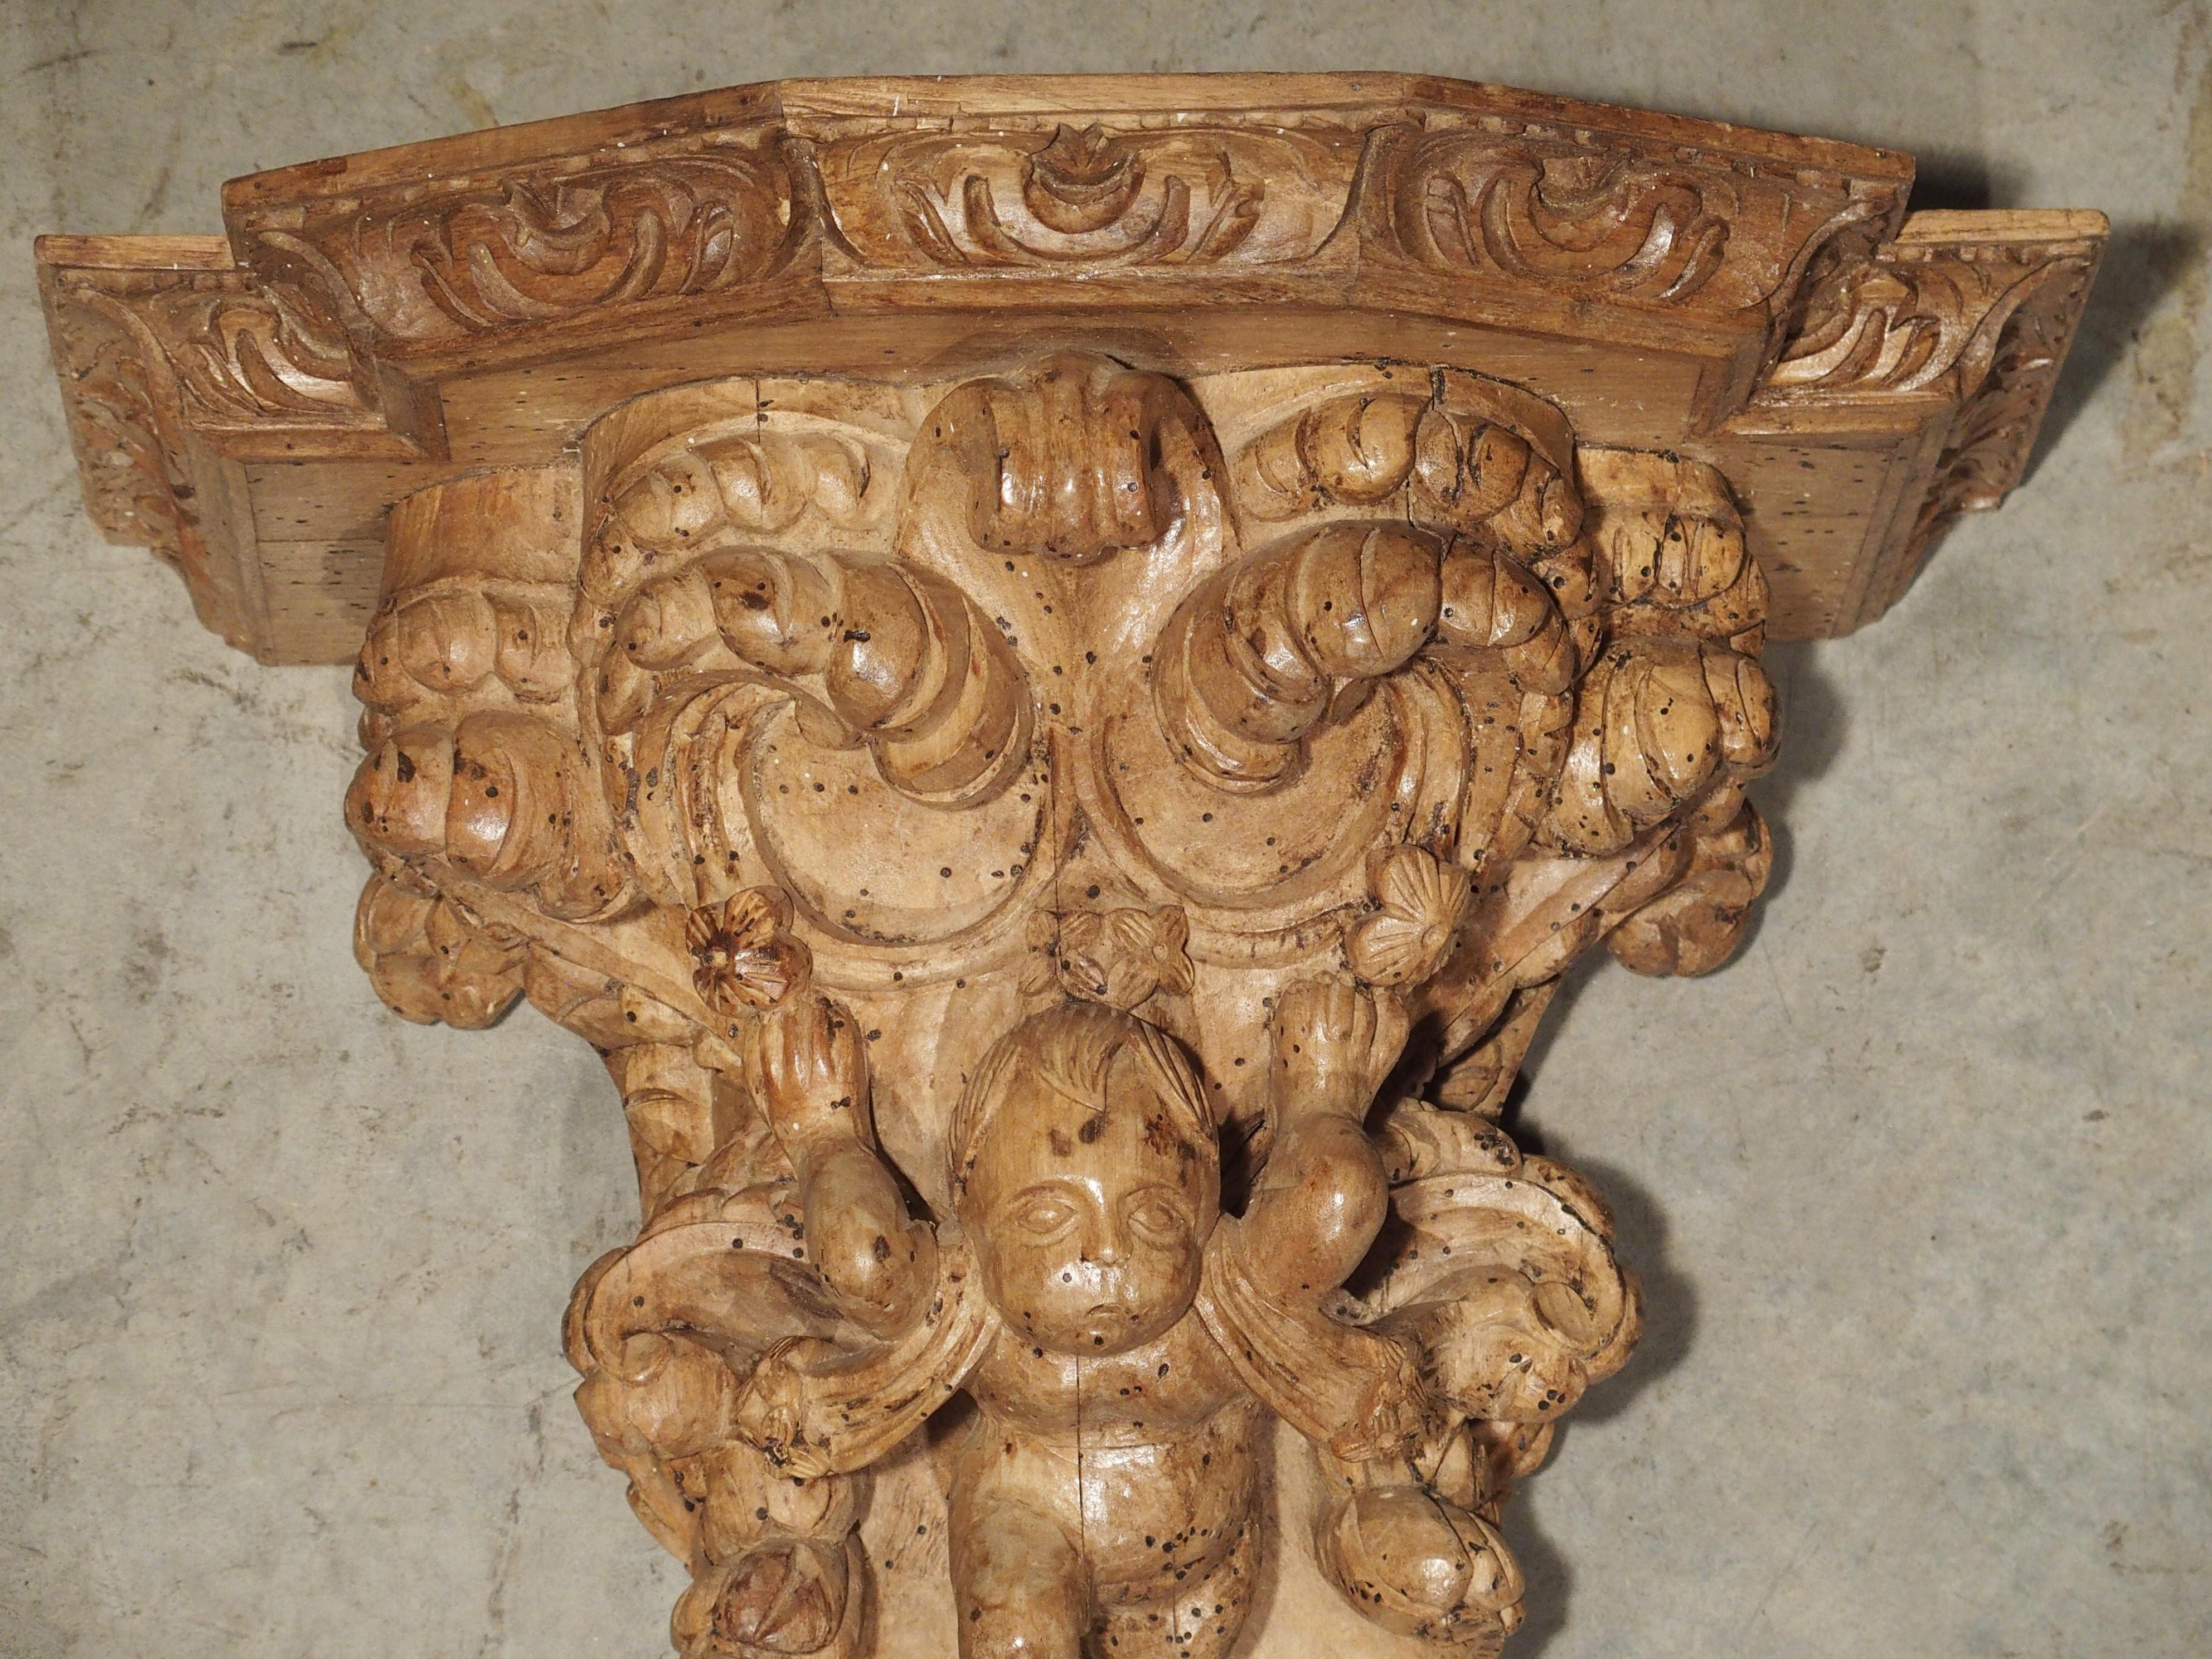 From Italy, this beautiful hand carved, natural wood wall bracket dates to the 1600s. The entire bracket is flush with robust C-scroll carvings, acanthus leaves and feathered ornamentation. The top has a center molding that is horizontal with canted